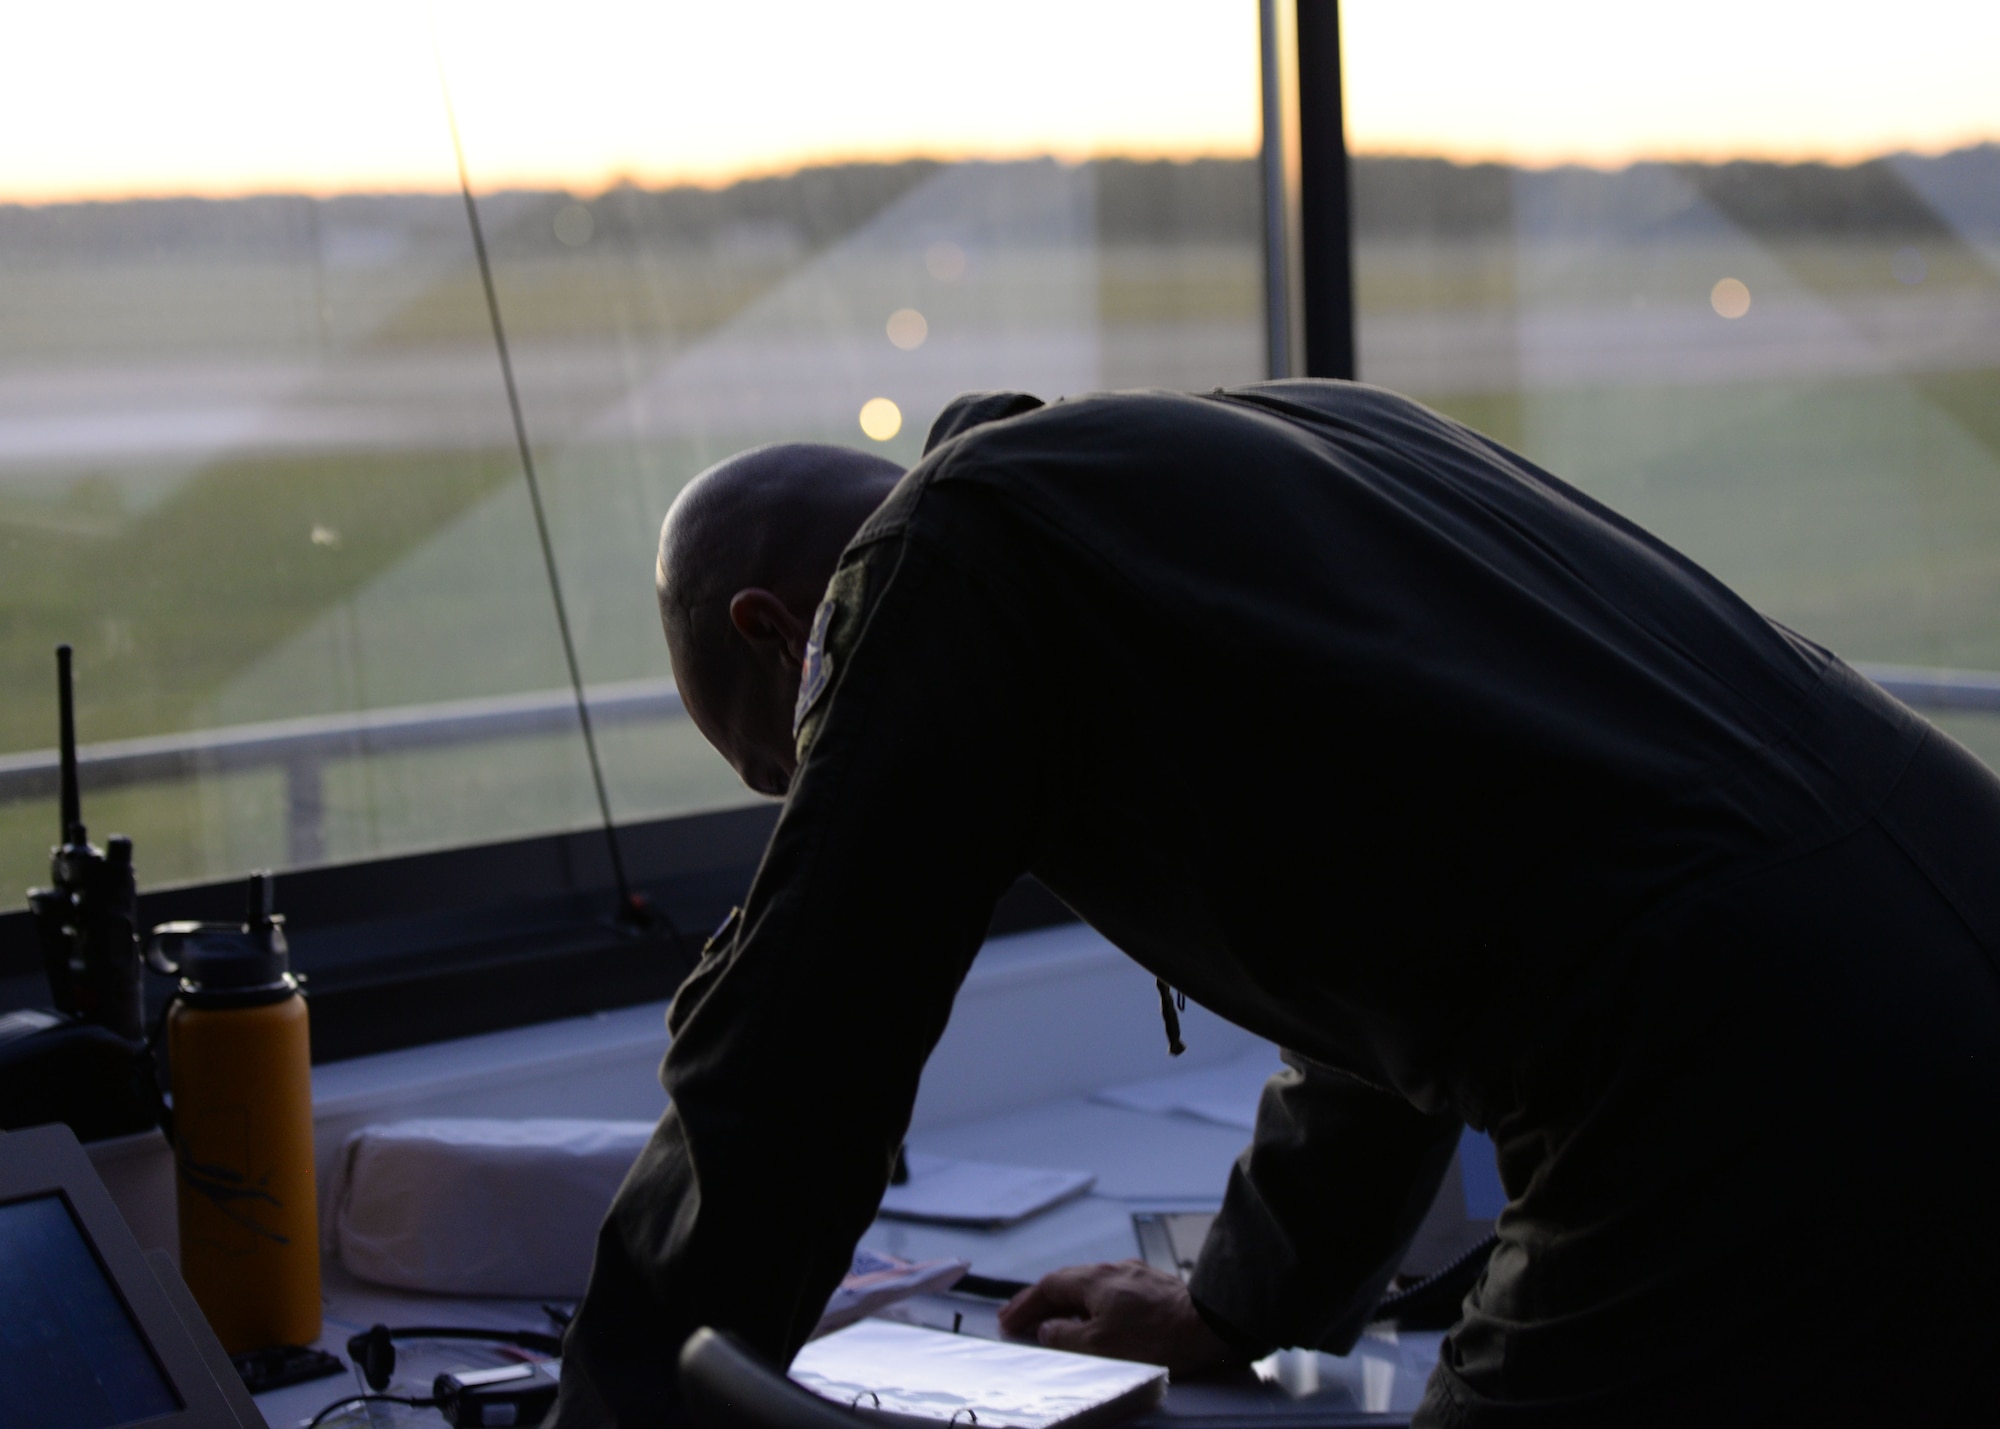 RSUs: A critical role in air traffic control, pilot production